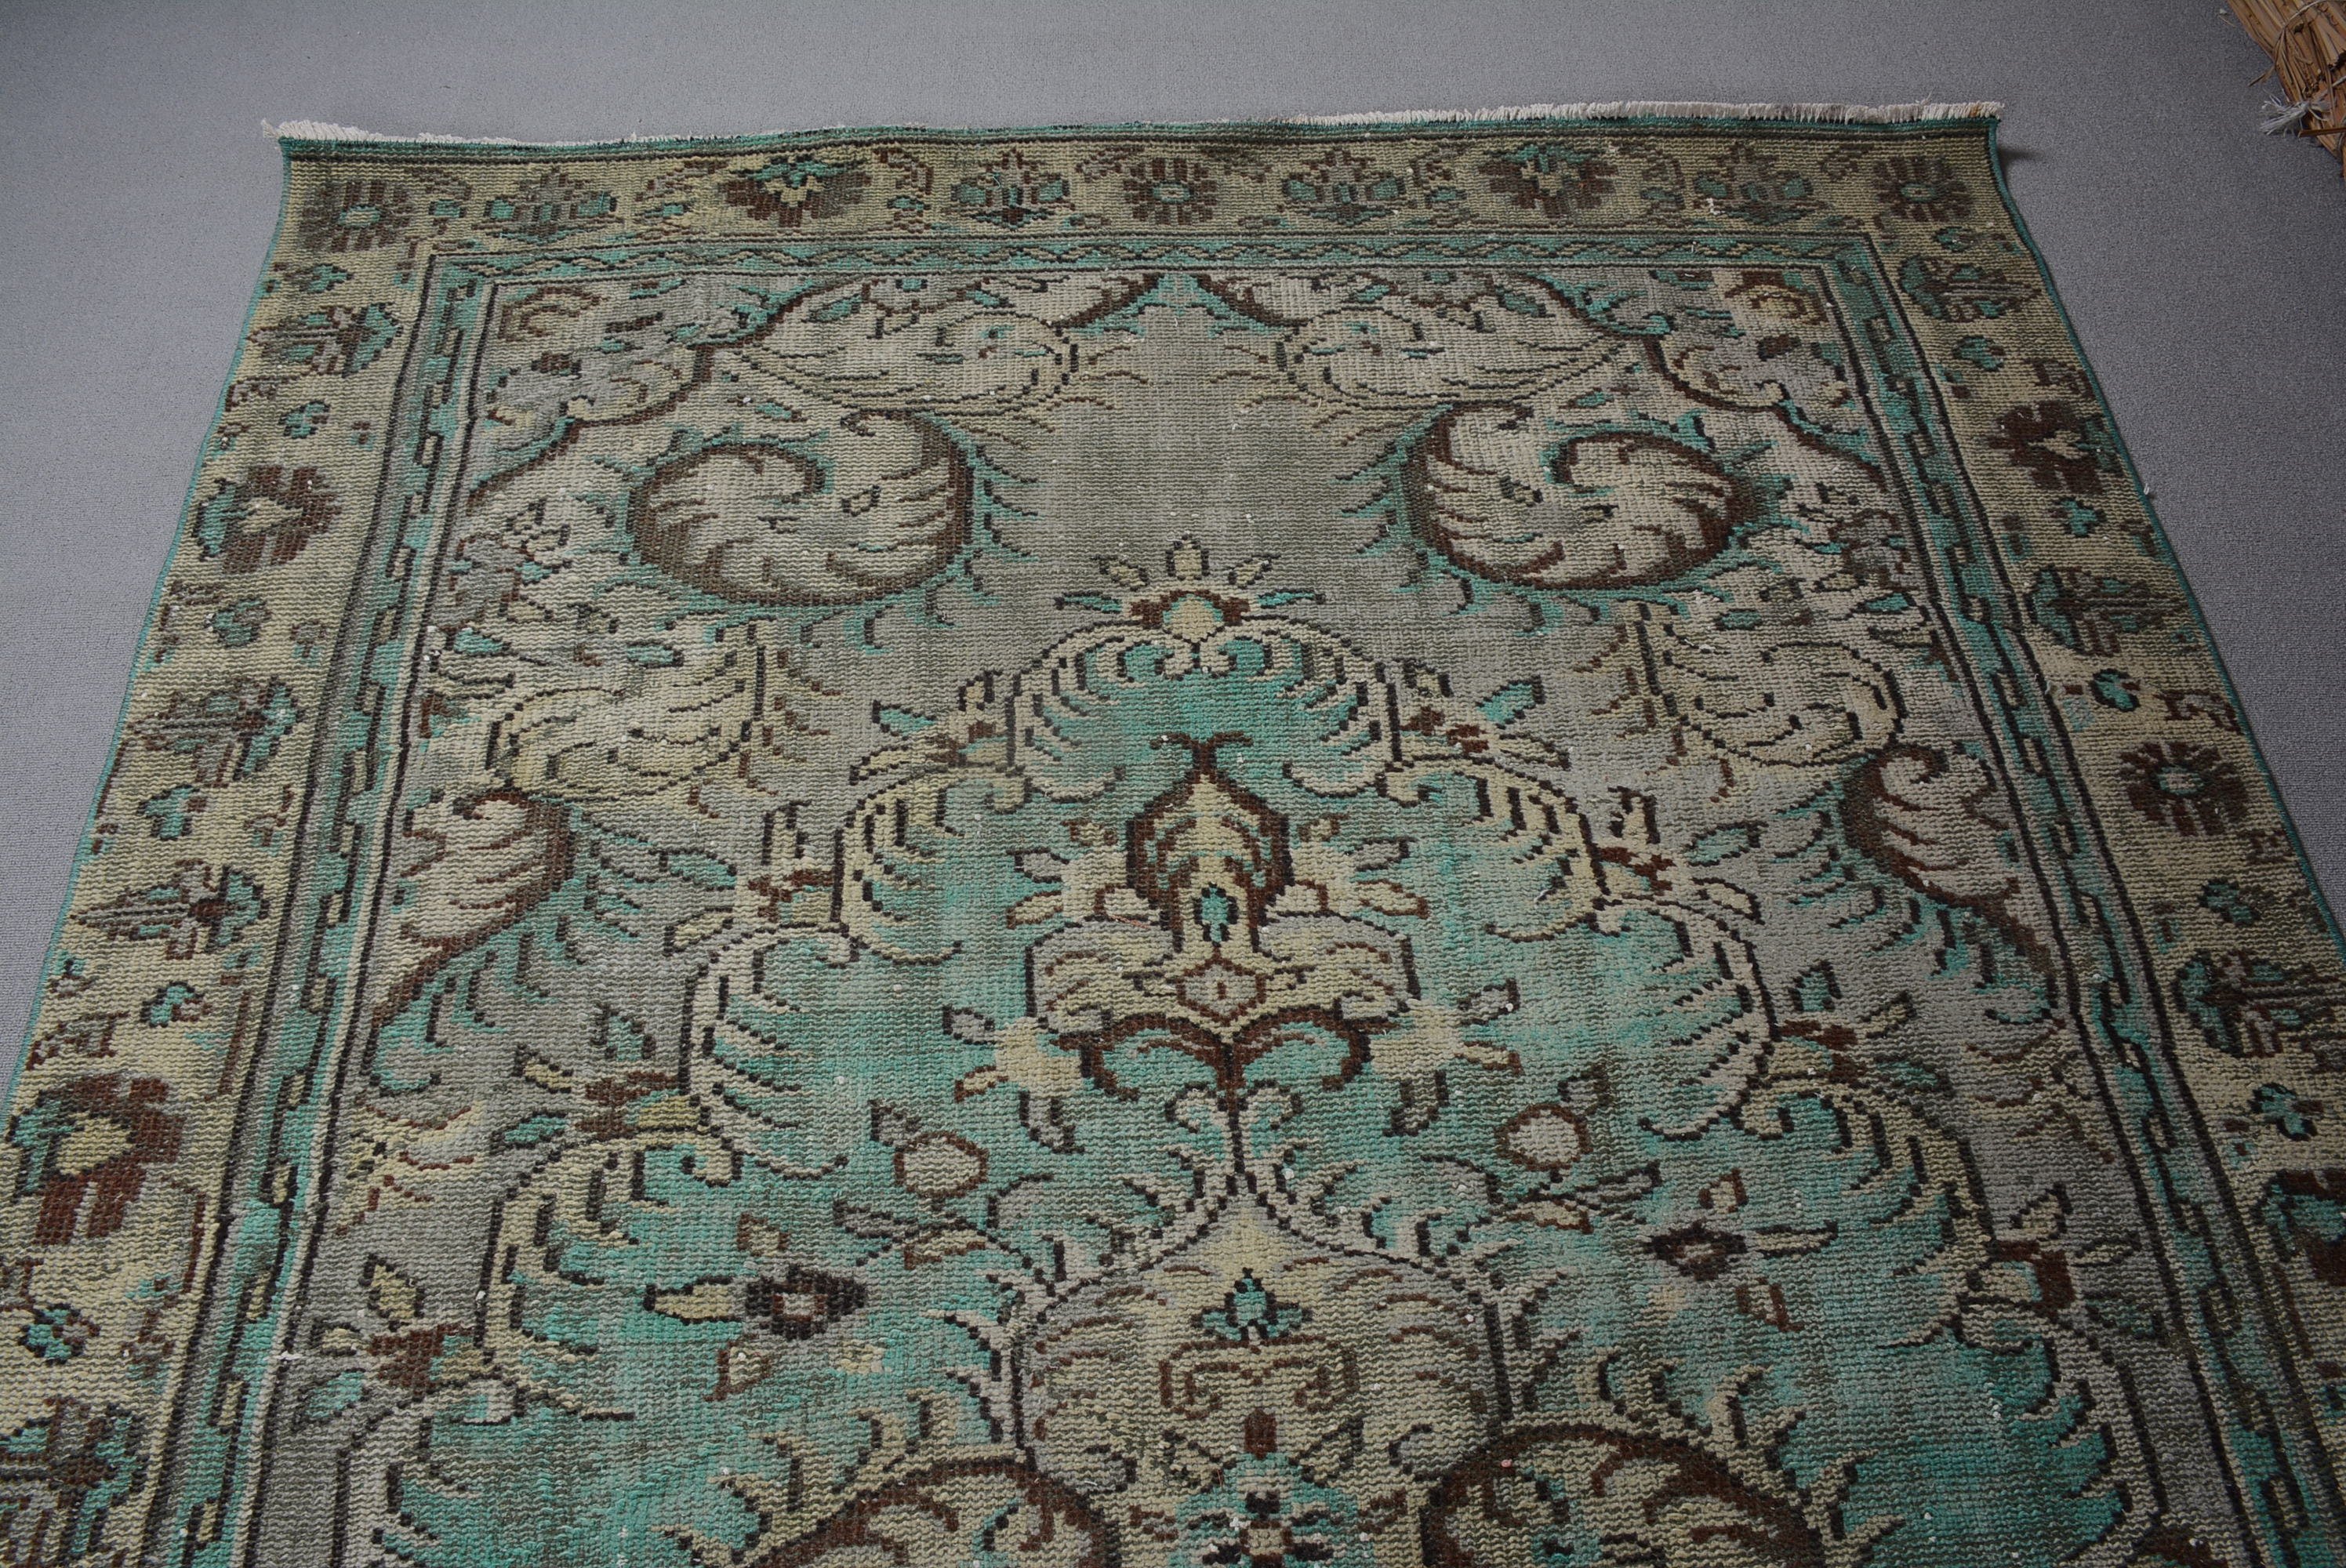 Salon Rugs, Pale Rugs, Dining Room Rug, Vintage Rug, Home Decor Rugs, Turkish Rugs, Oushak Rugs, Green  5.3x9.5 ft Large Rug